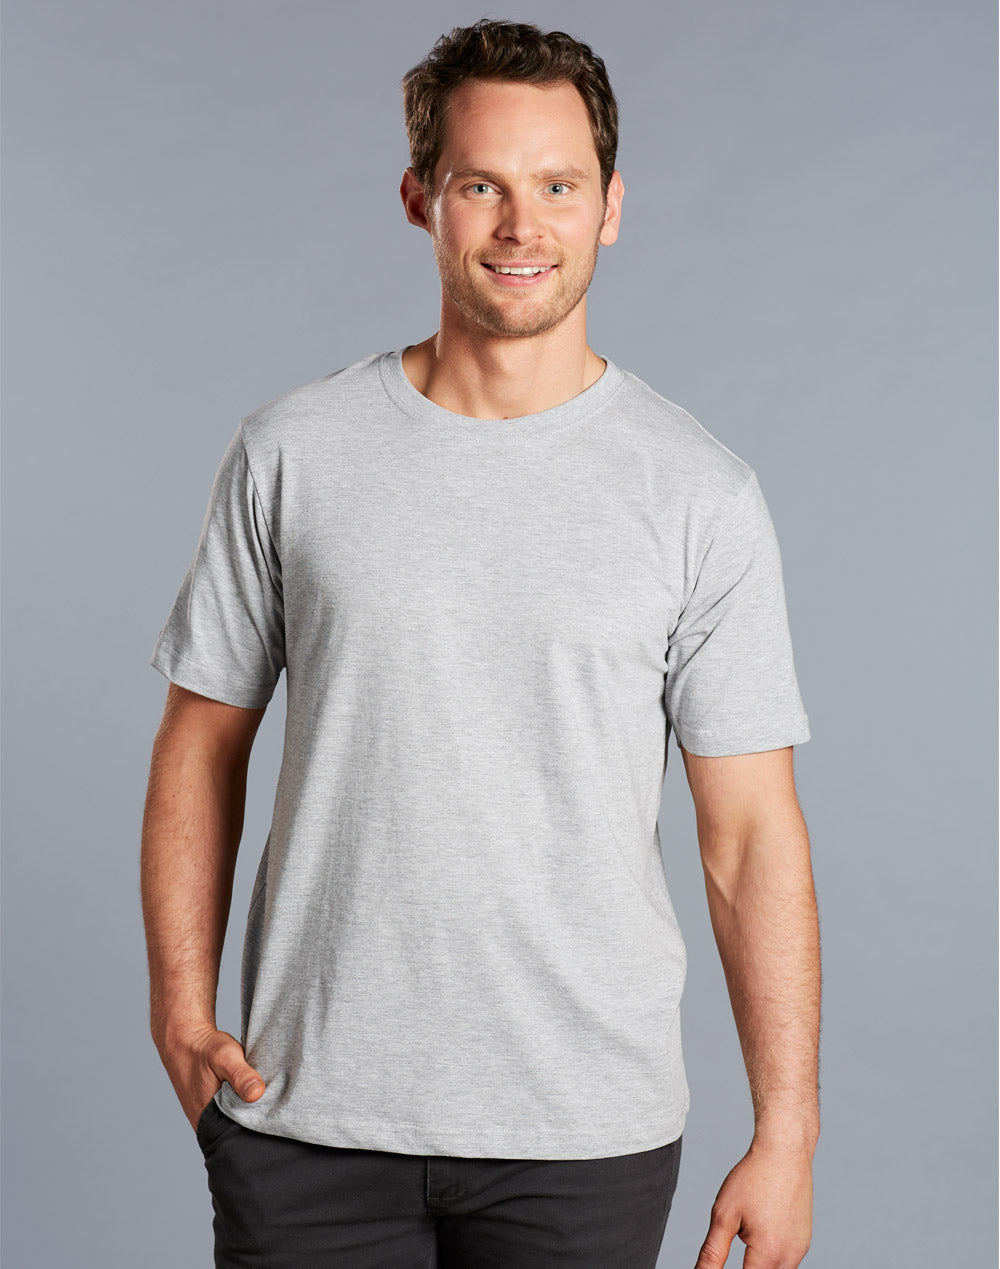 [TS37] Men's Cotton Semi Fitted Tee